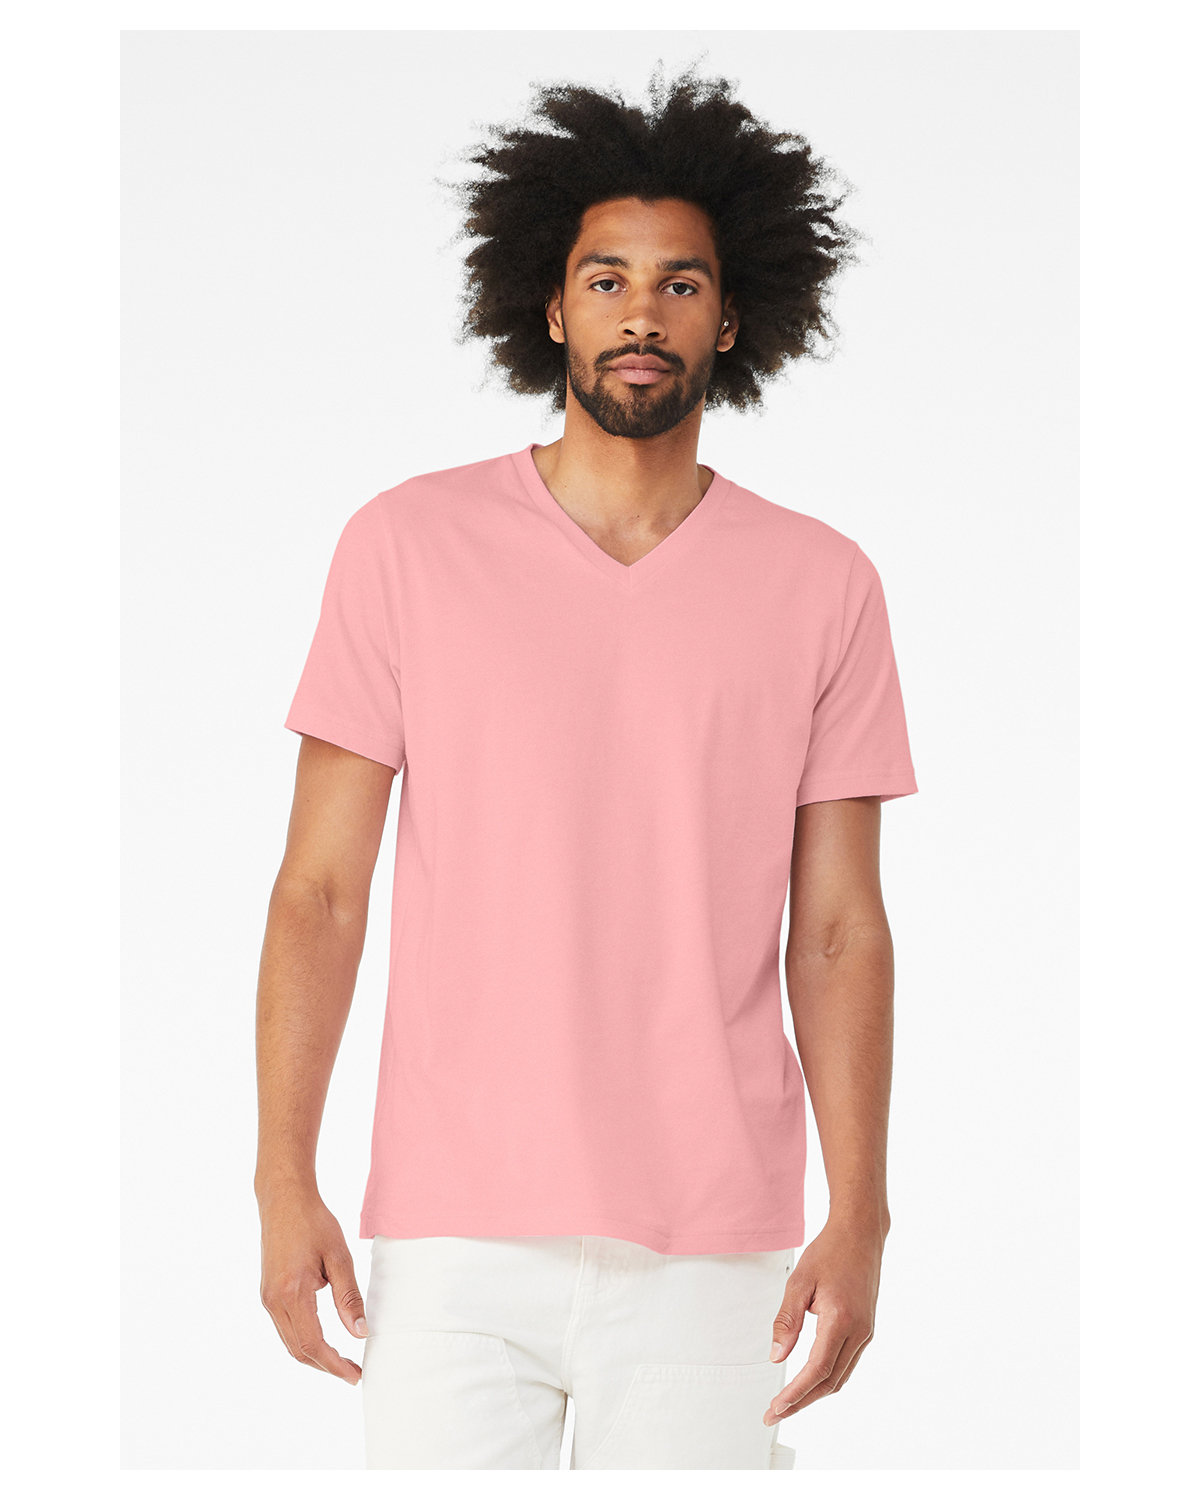 JustBlanks Young Men's Short Sleeve The Concert Tee 4.5-ounce, 100% Soft  Spun Cotton Jersey Keep The Beat in Harmony in This V-Neck T-Shirt for Men  - Neon Pink - X-Small 